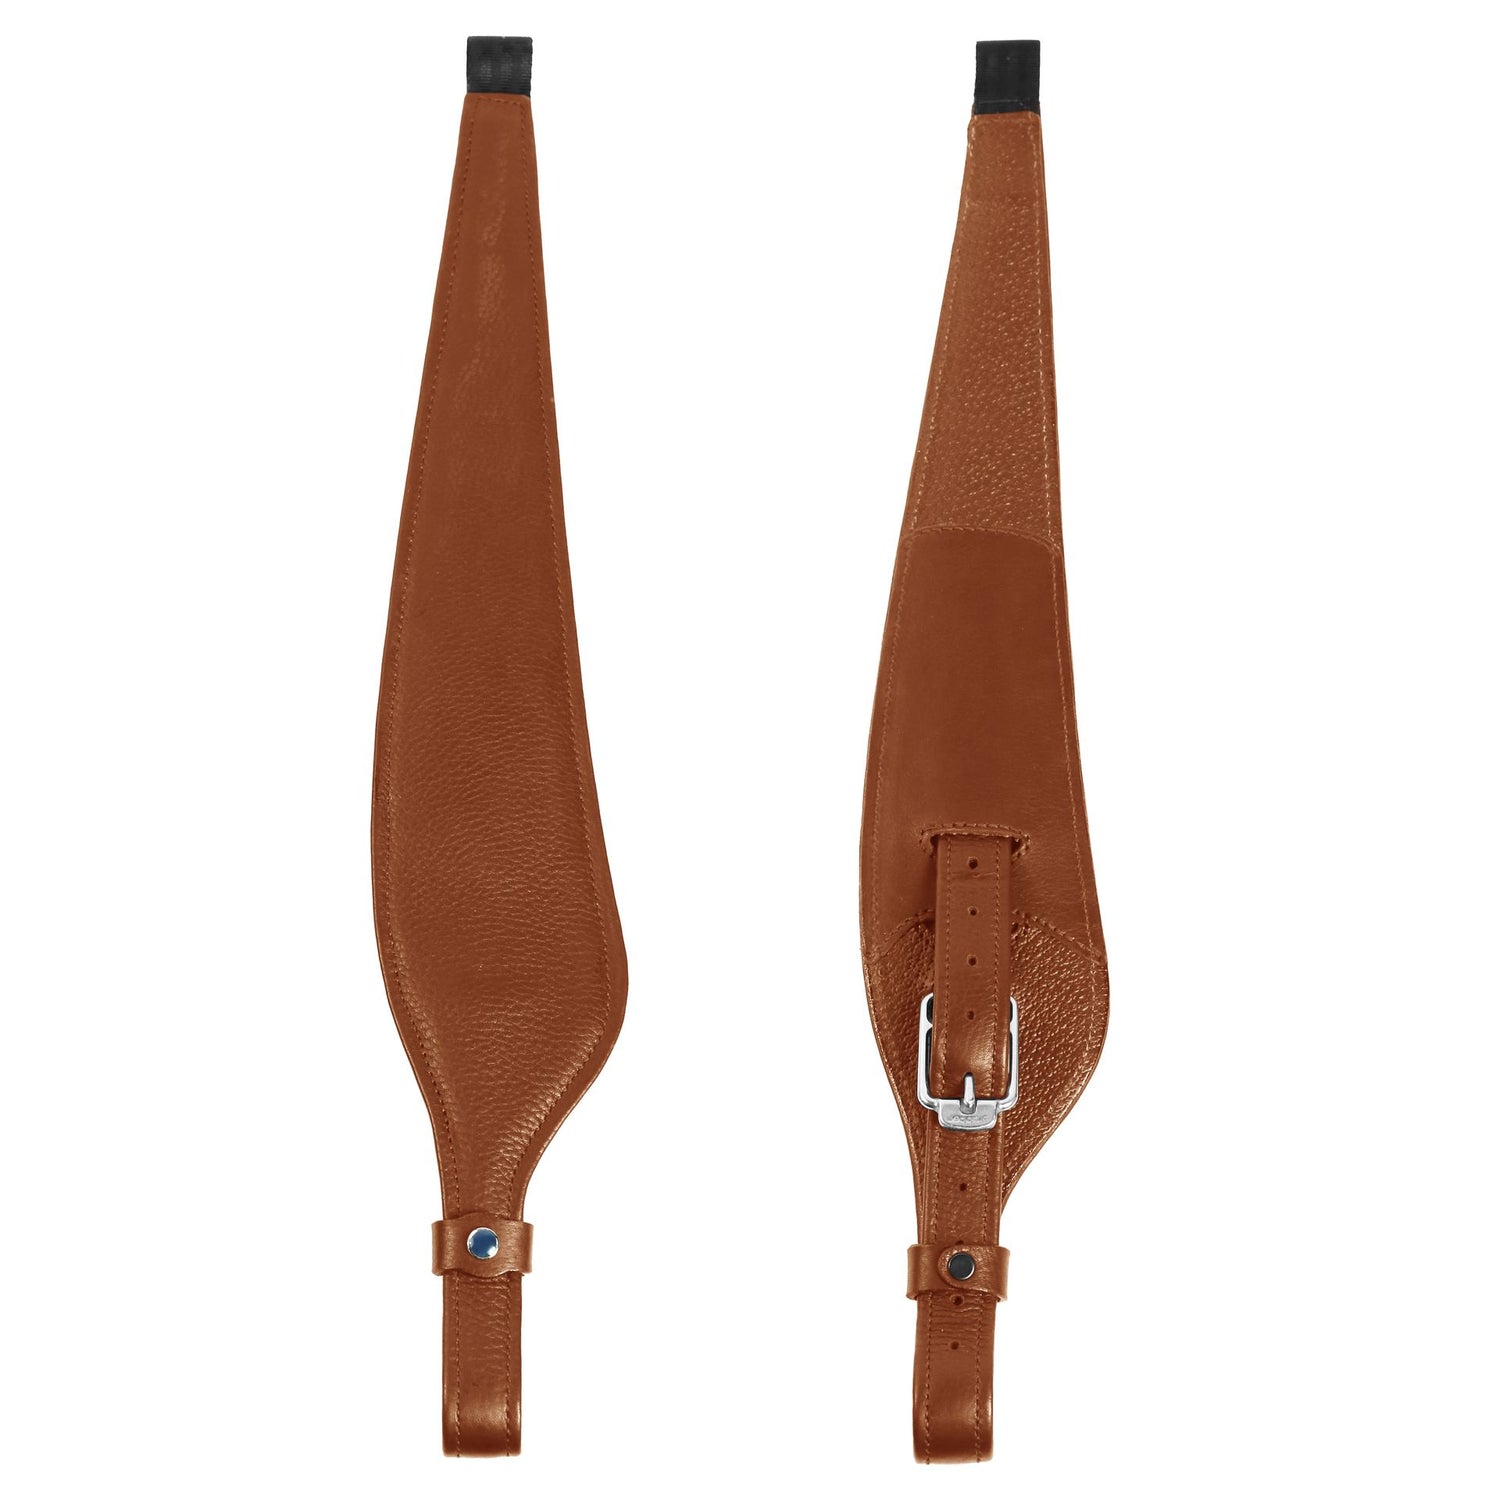 Wide stirrup leathers for jumping saddle